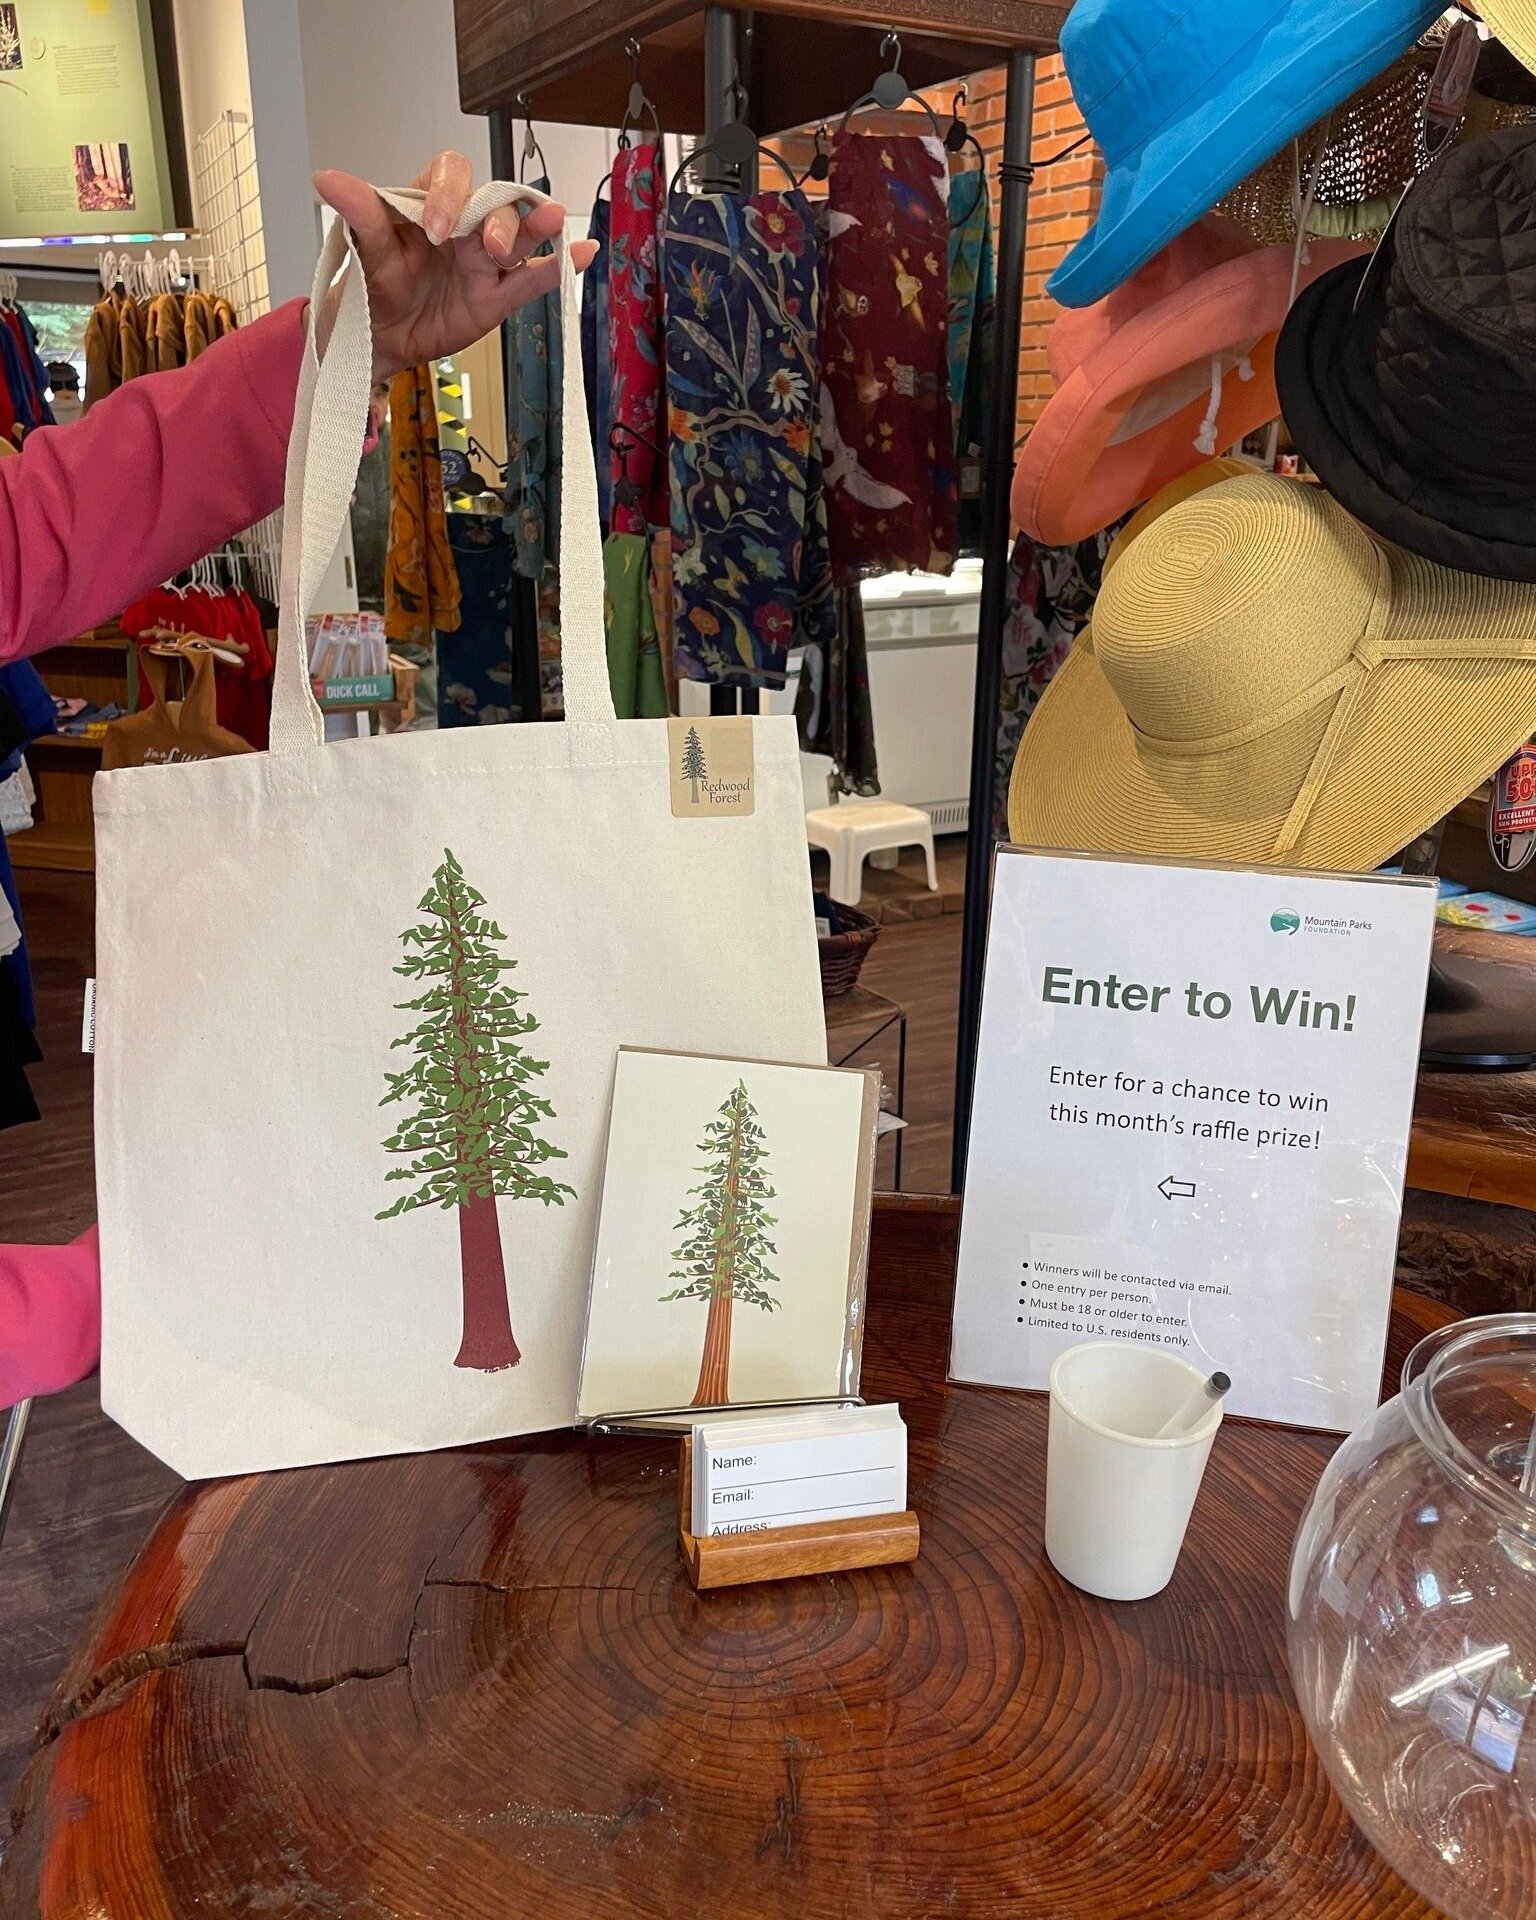 March's raffle is live! While you're in Henry Cowell Redwoods State Park stroll by the Nature Store for some shopping and to enter for this months prizes.